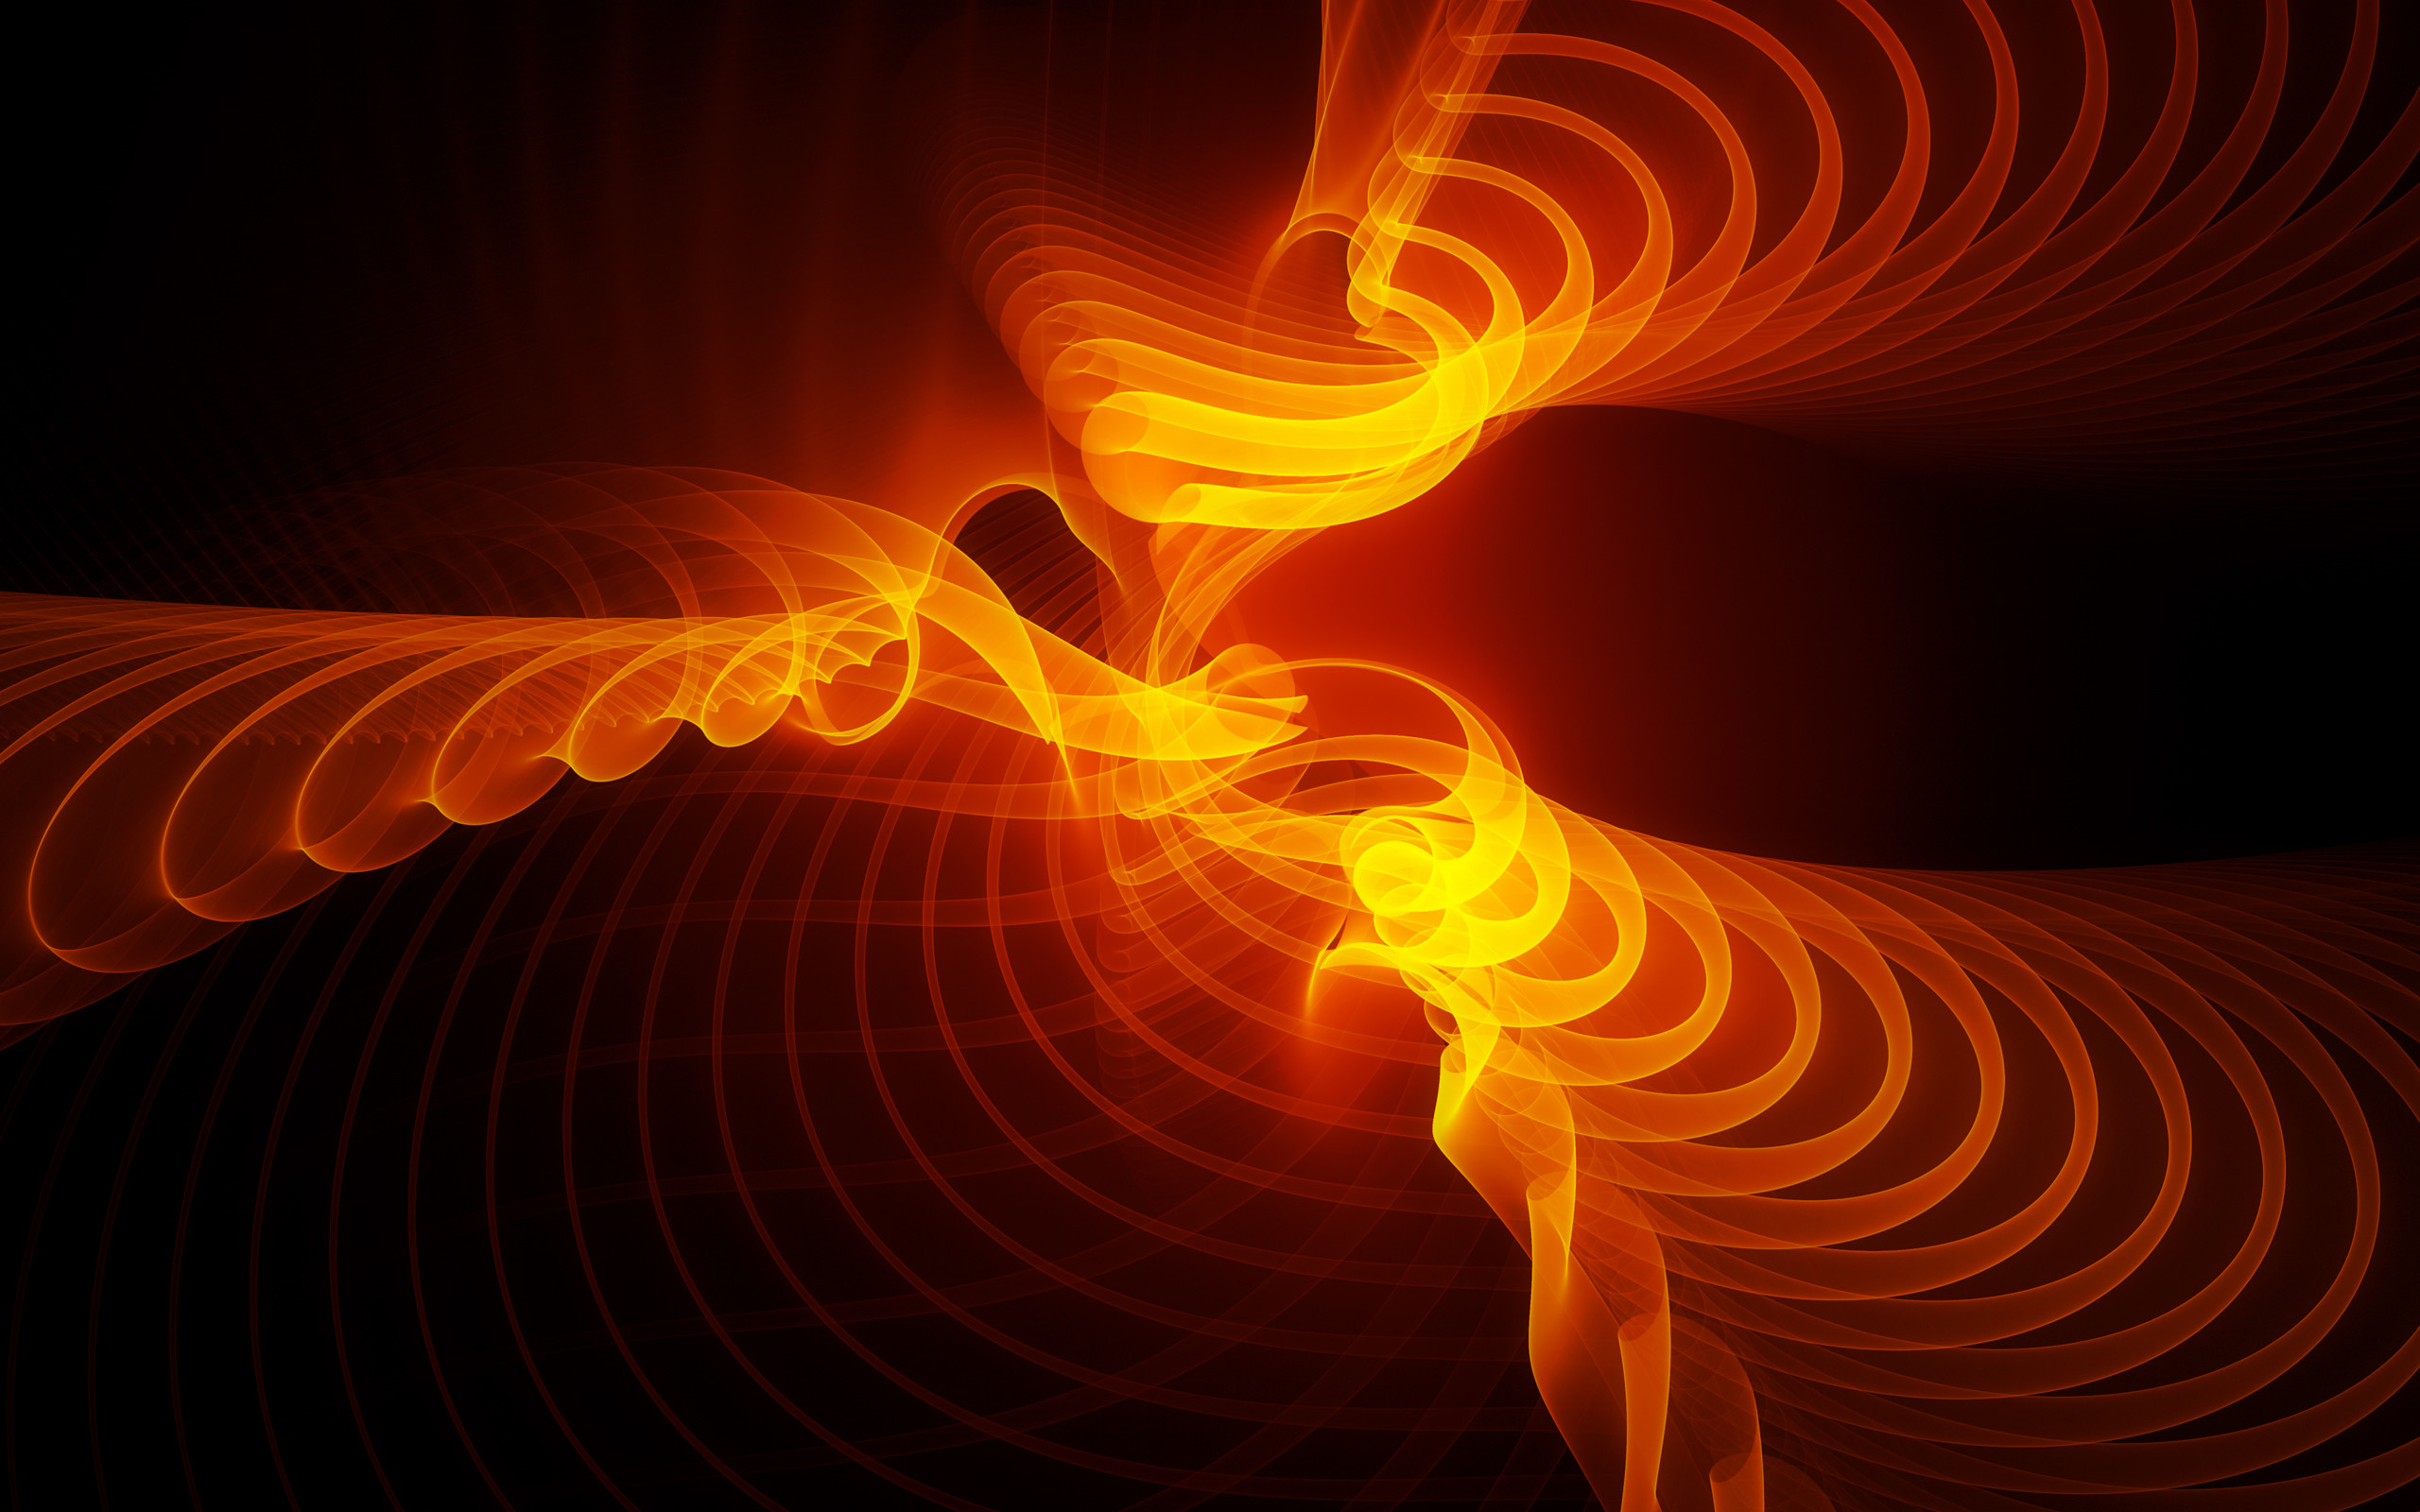 Cool Black and Orange Abstract – See more similiar images at backgroundimages.biz